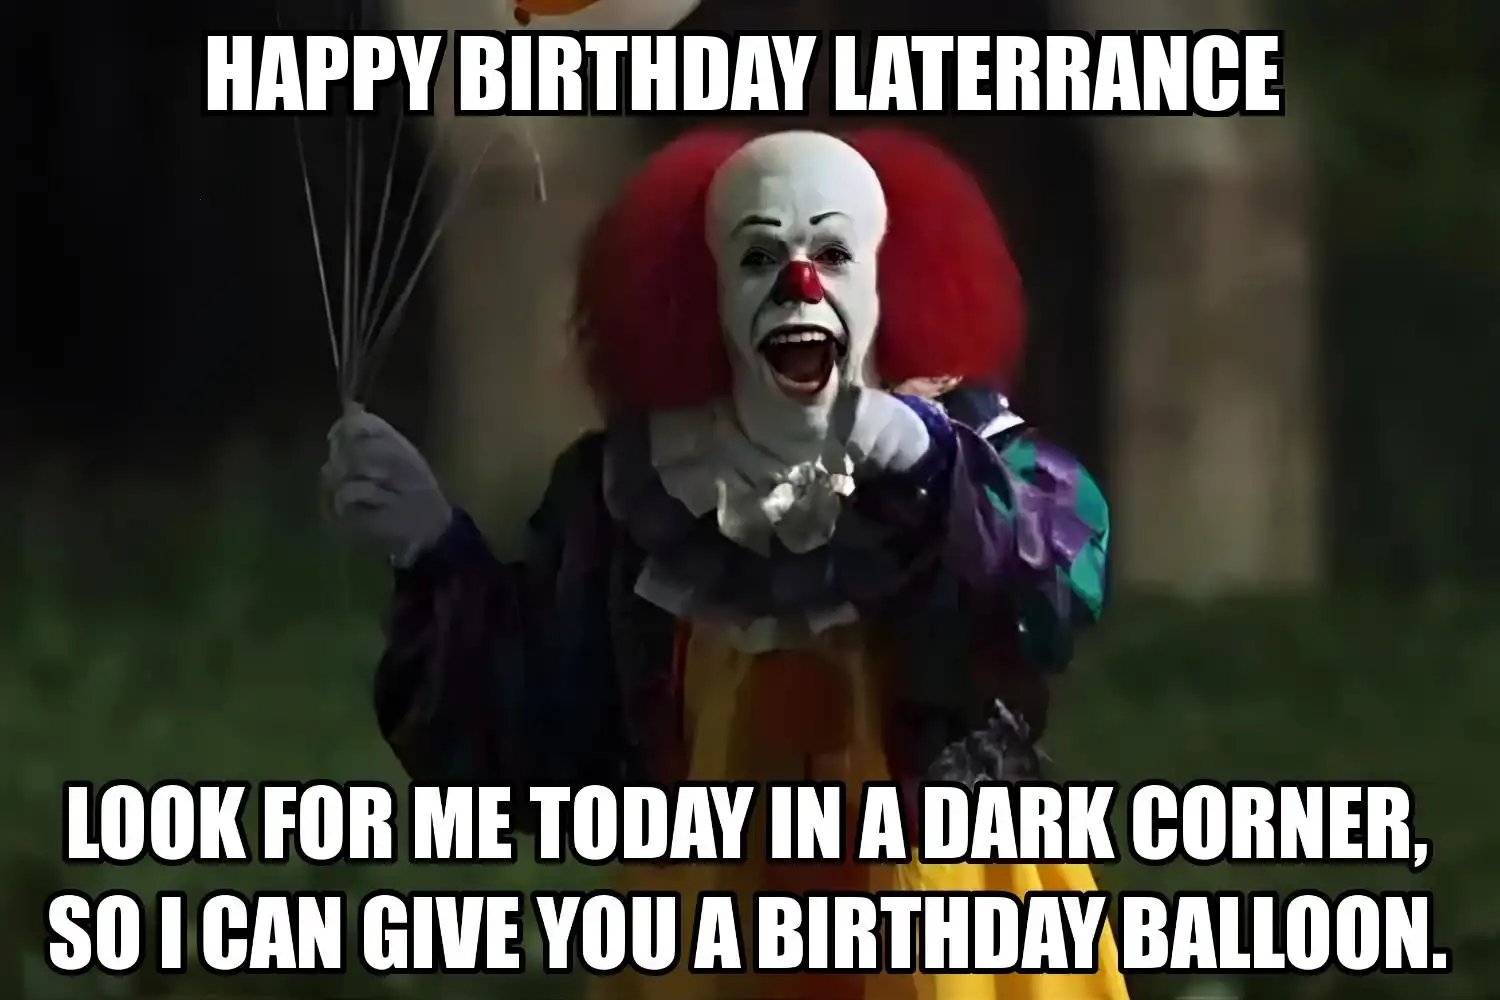 Happy Birthday Laterrance I Can Give You A Balloon Meme